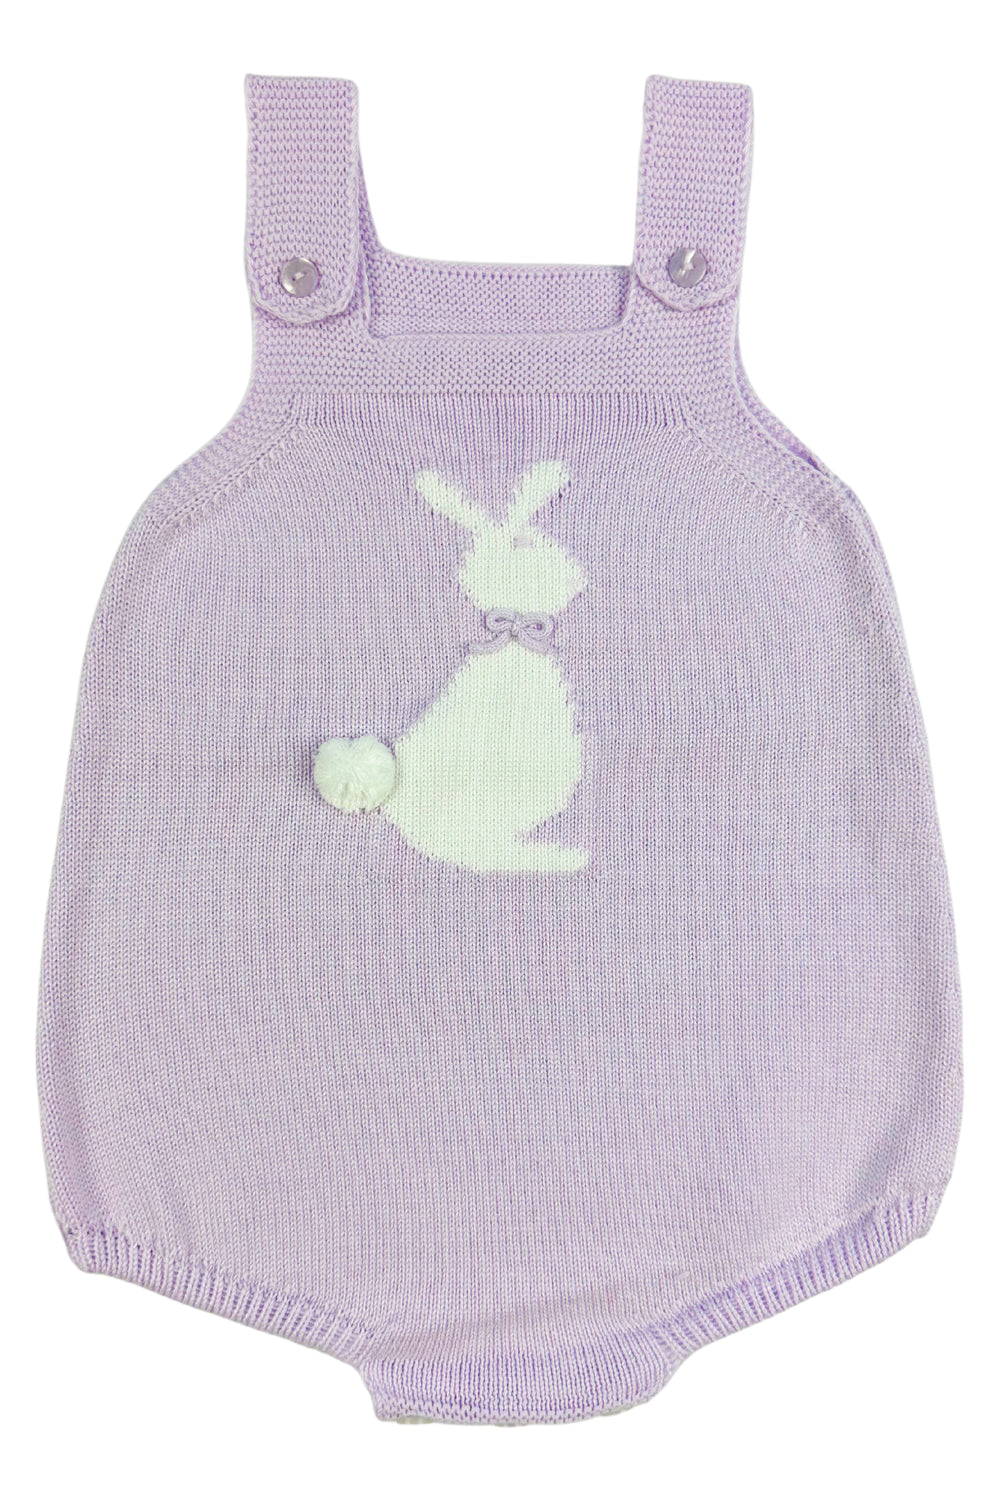 Granlei "Roux" Lilac Knit Bunny Dungaree Romper | iphoneandroidapplications